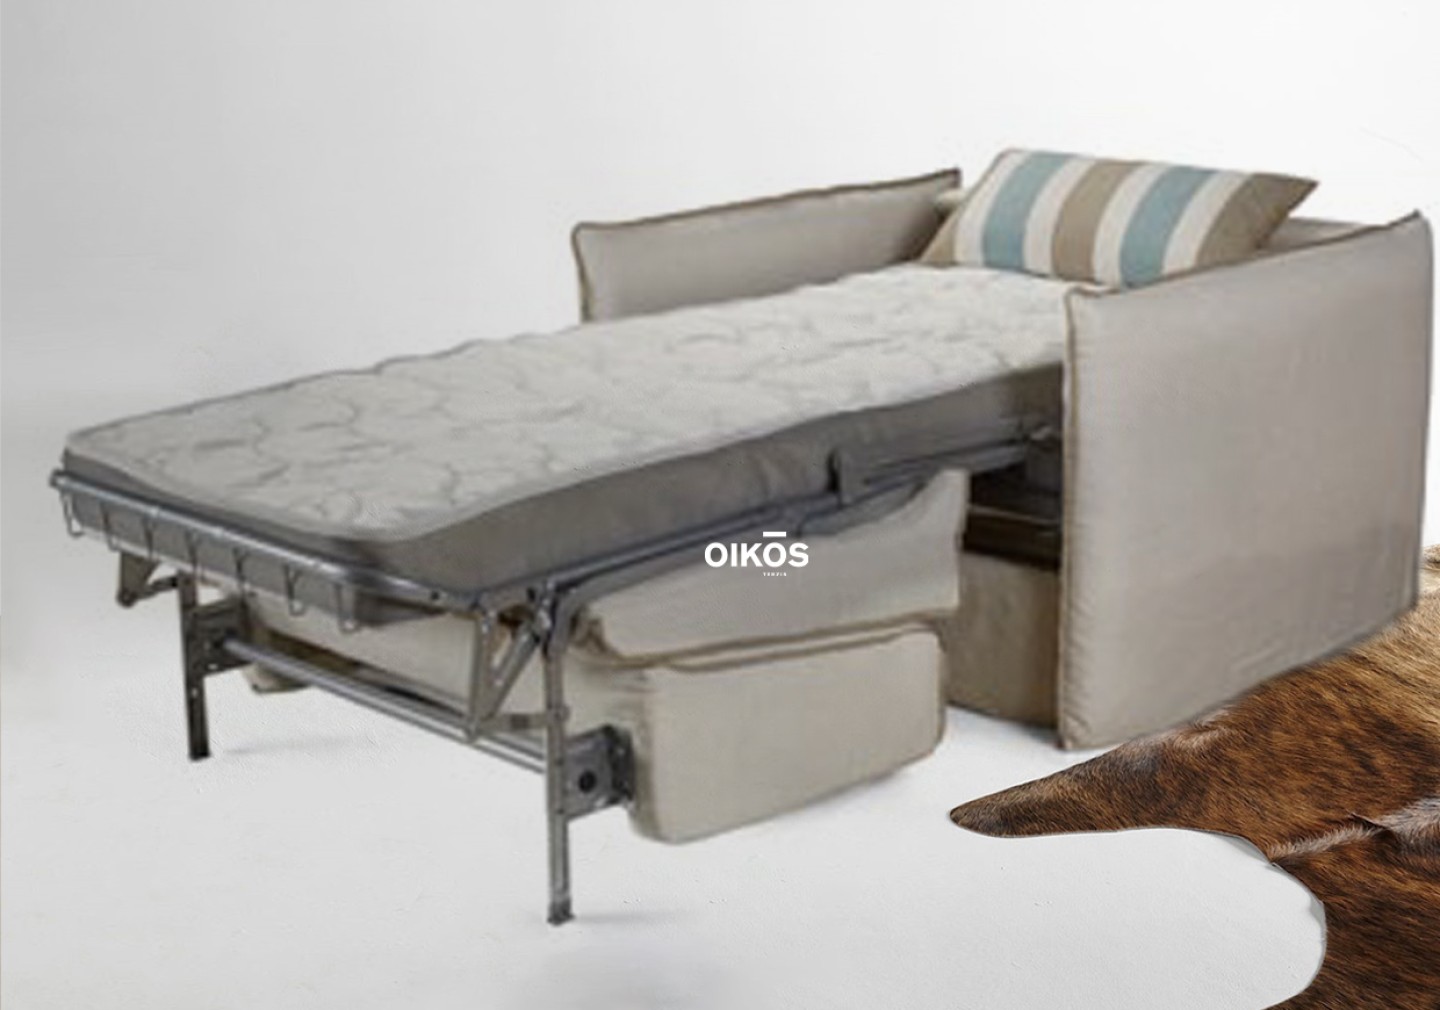 THE RIVER PROFESSIONAL ARMCHAIR BED